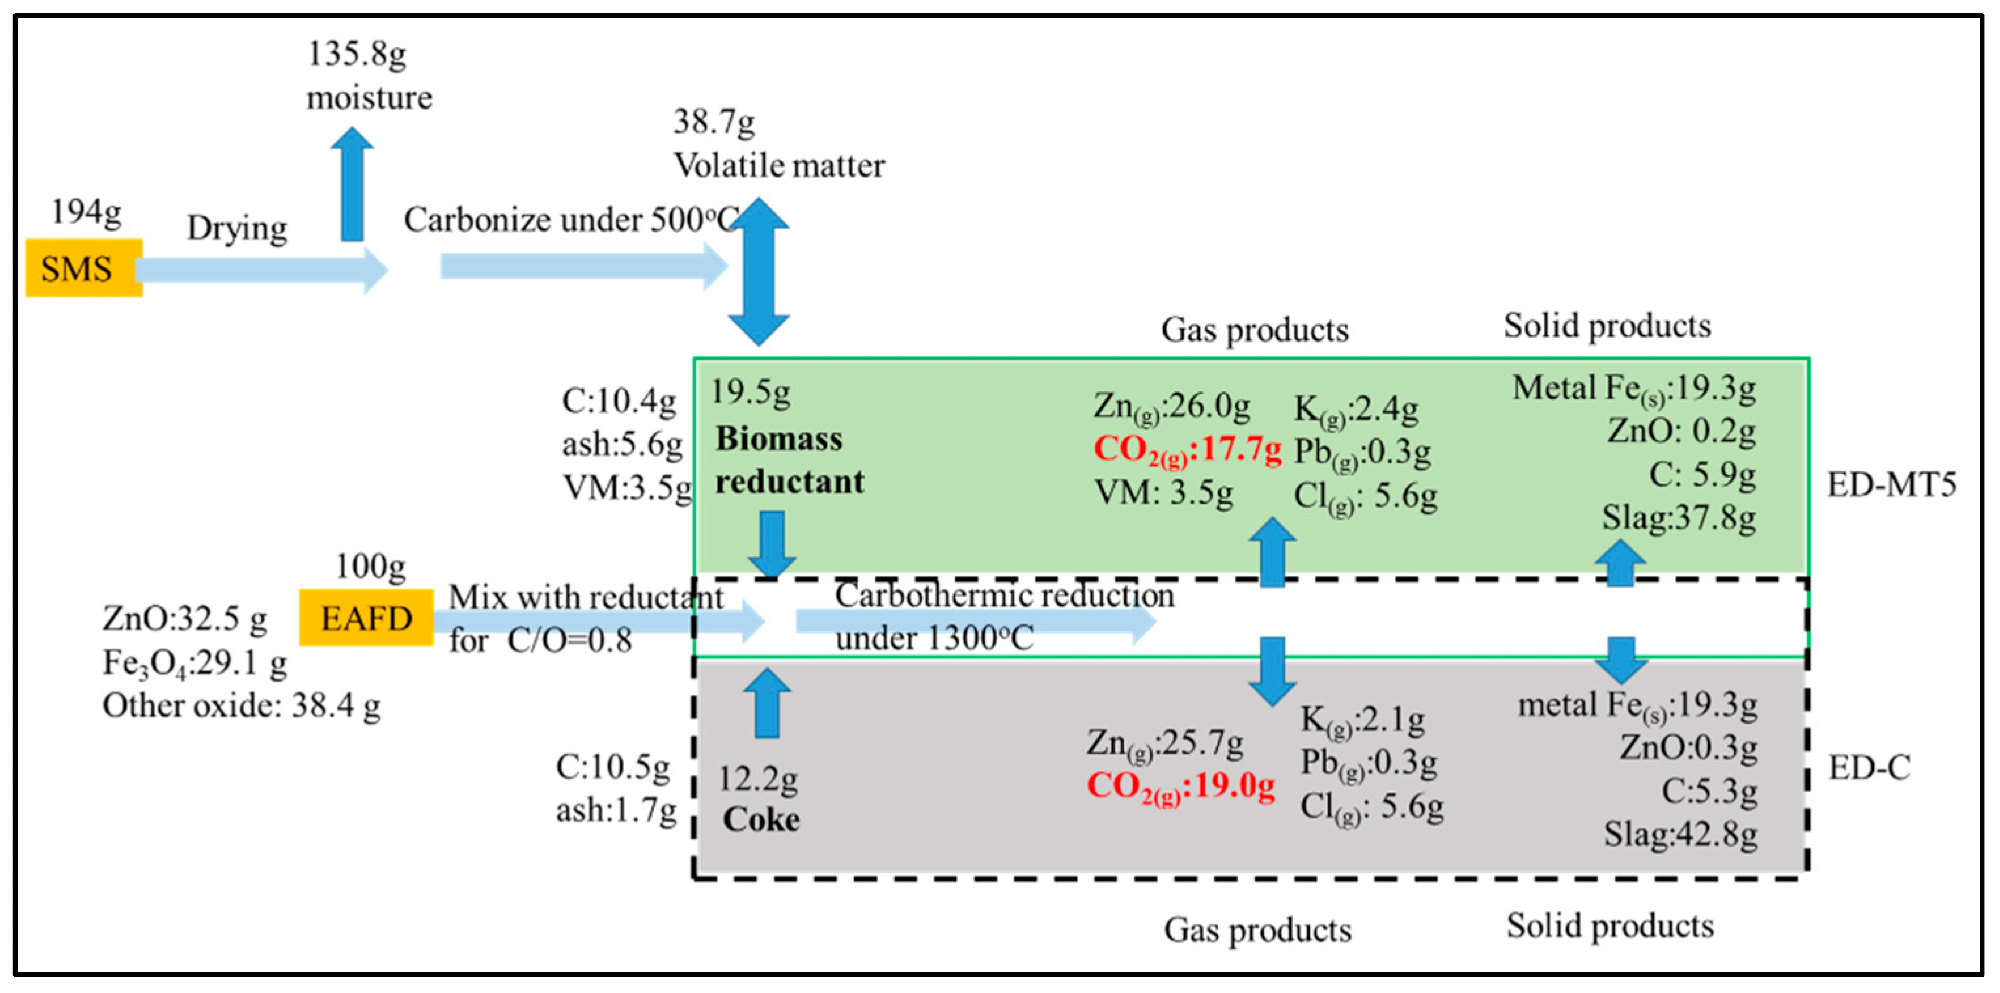 Material flow analysis of ED-MT5 and ED-C as EAFD reducing agents (C/O = 0.8, 1300 °C) and their effects on carbon emissions. Under almost the same Zn products, biomass samples produced less CO2 than coke samples. Besides, the biomass reductant showed the potential for extra carbon-reducing according to the assumption of carbon neutrality. Taiwan needs to process 120,000 tons of EAFD annually. If this method is adopted, 23,000 tons of CO2 emissions will be reduced, creating a channel to process 230,000 tons of SMS annually.